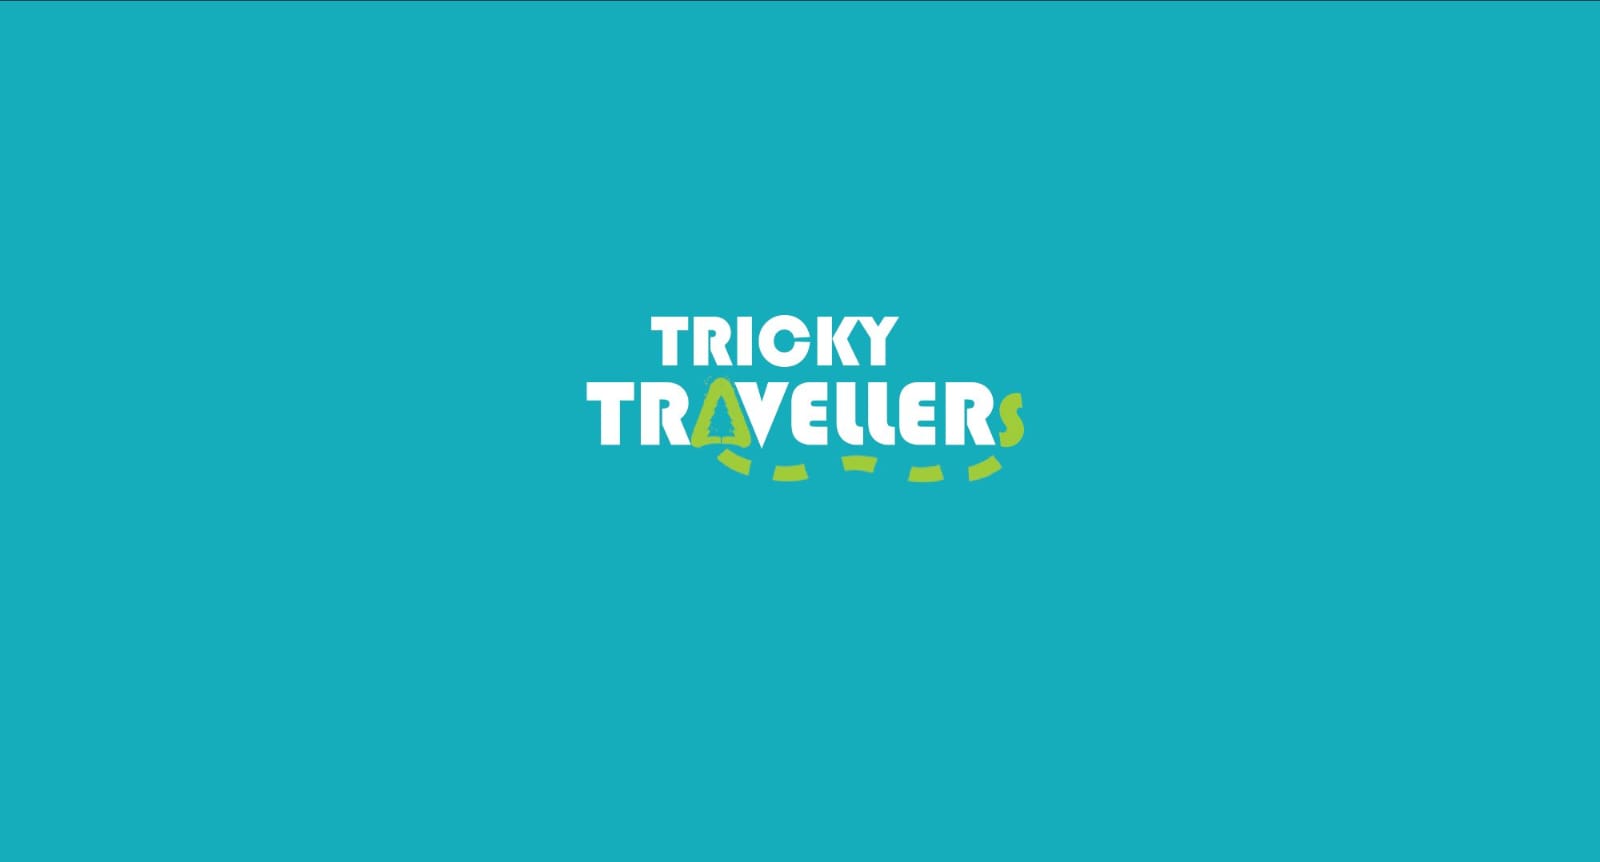 Tricky Travellers|Zoo and Wildlife Sanctuary |Travel